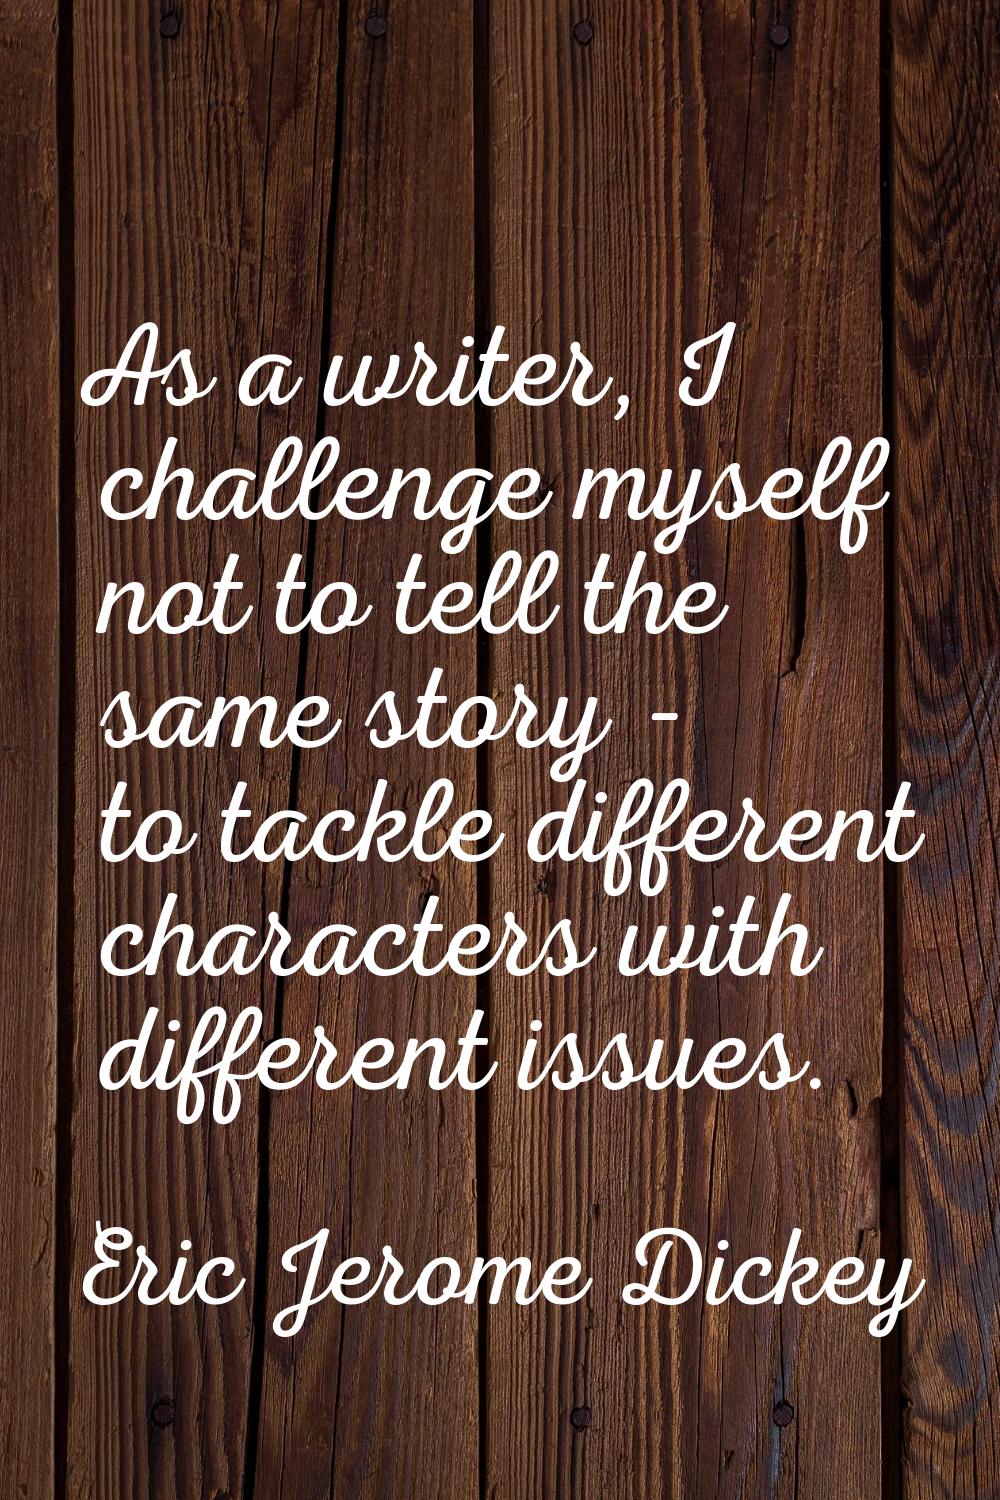 As a writer, I challenge myself not to tell the same story - to tackle different characters with di